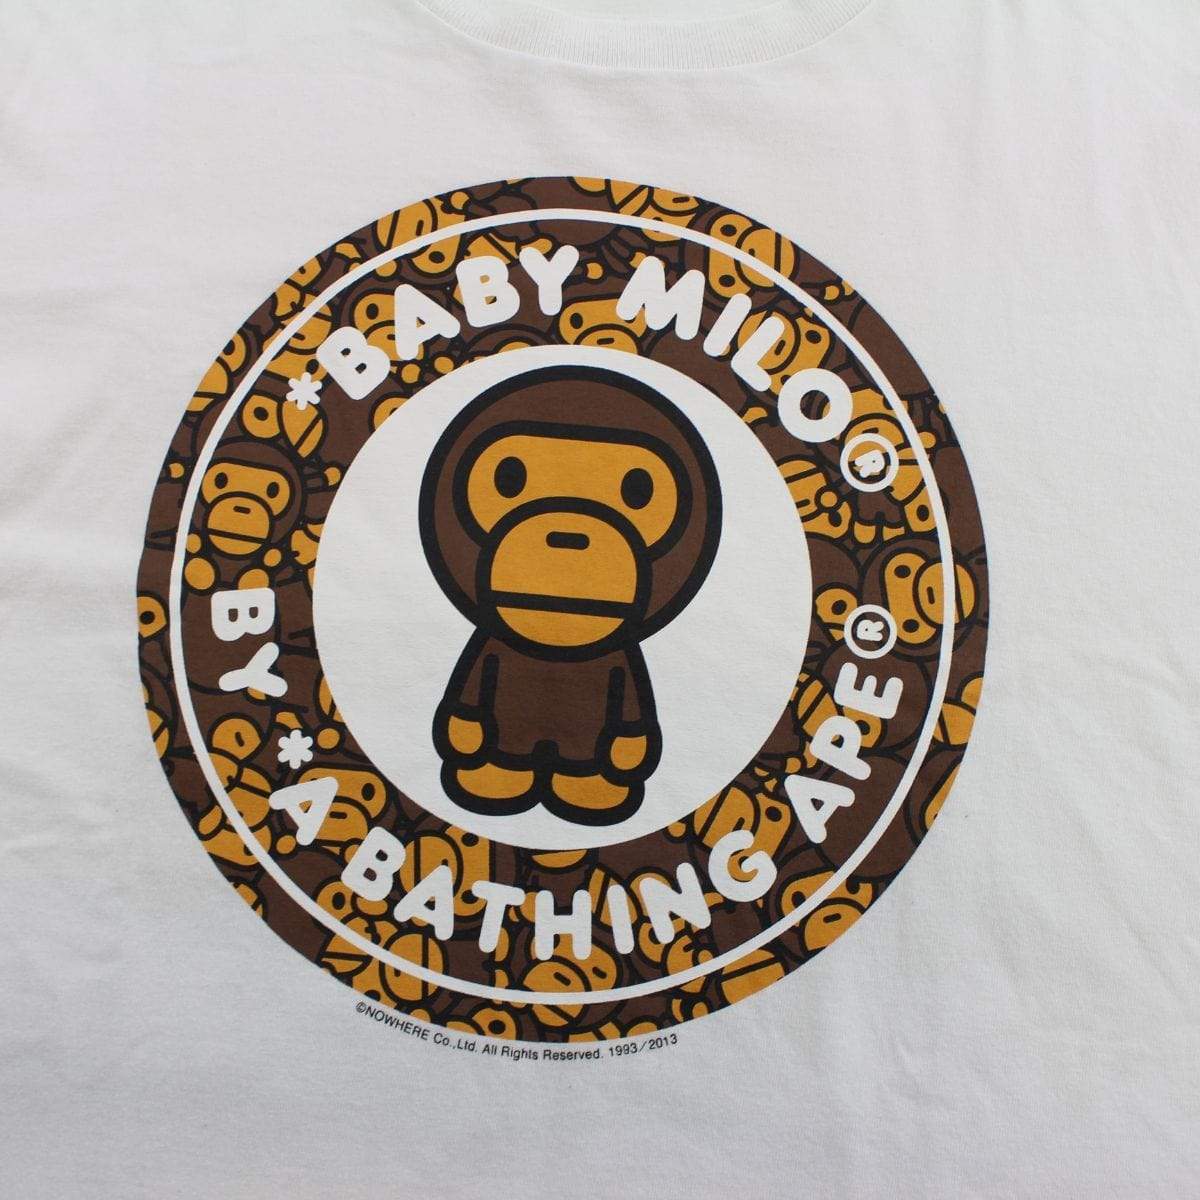 Bape Baby Milo Circle All-Over Tee - SaruGeneral